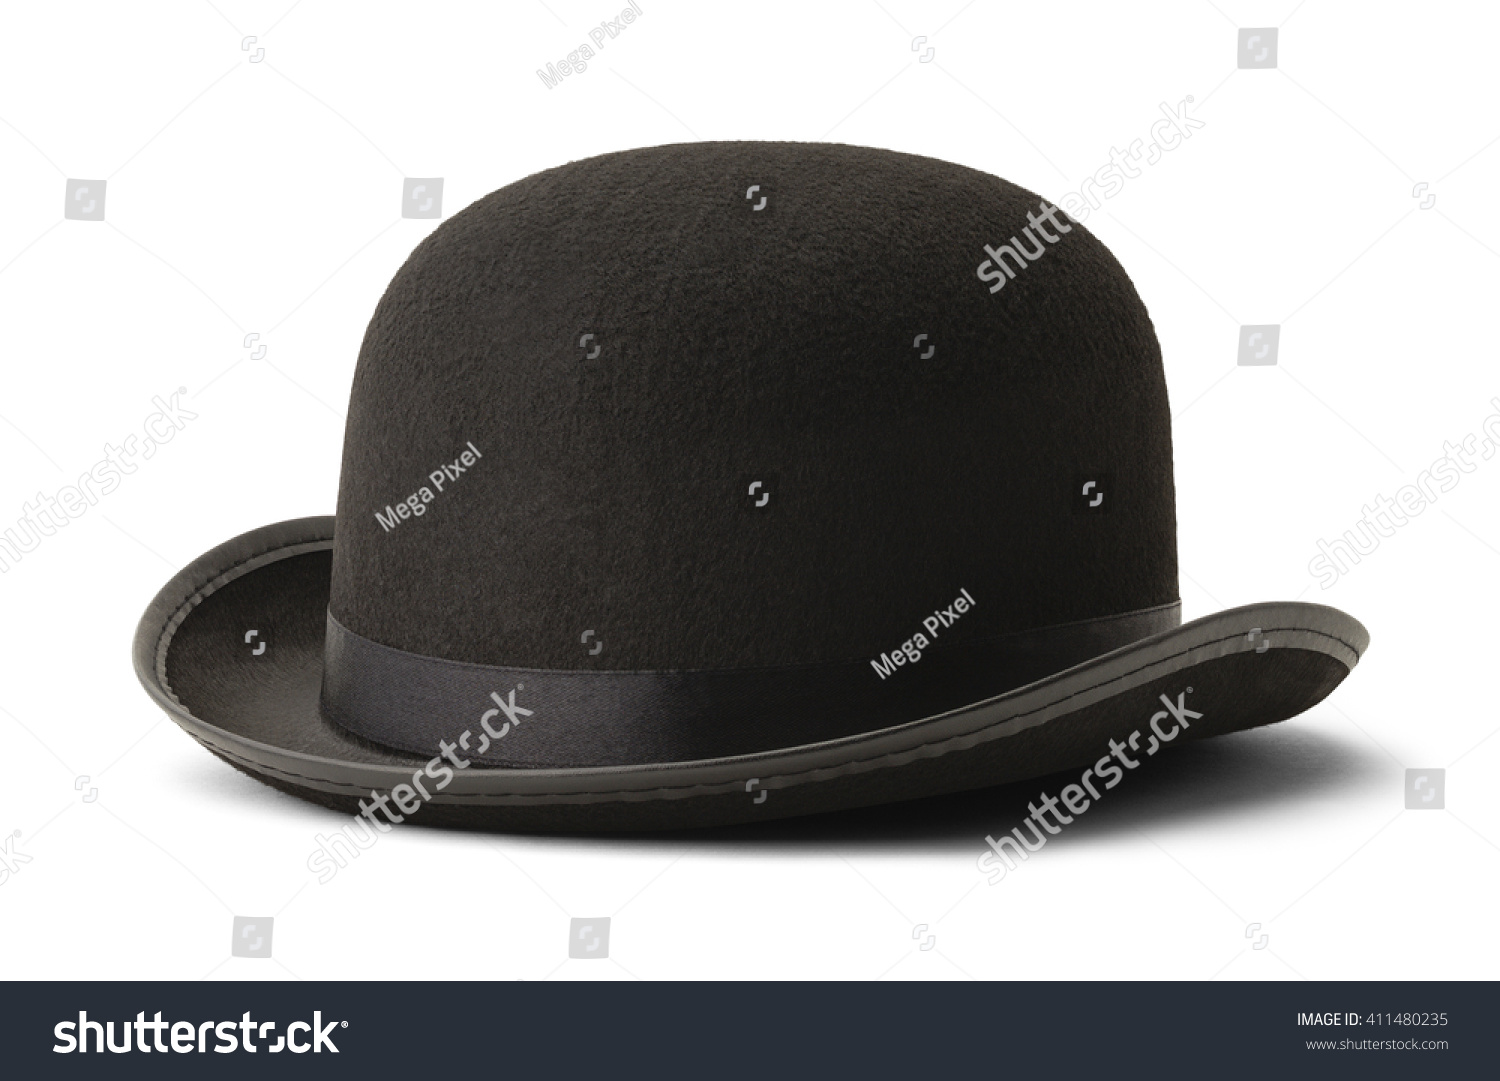 Black Bowler Hat Side View Isolated on White Background. #411480235